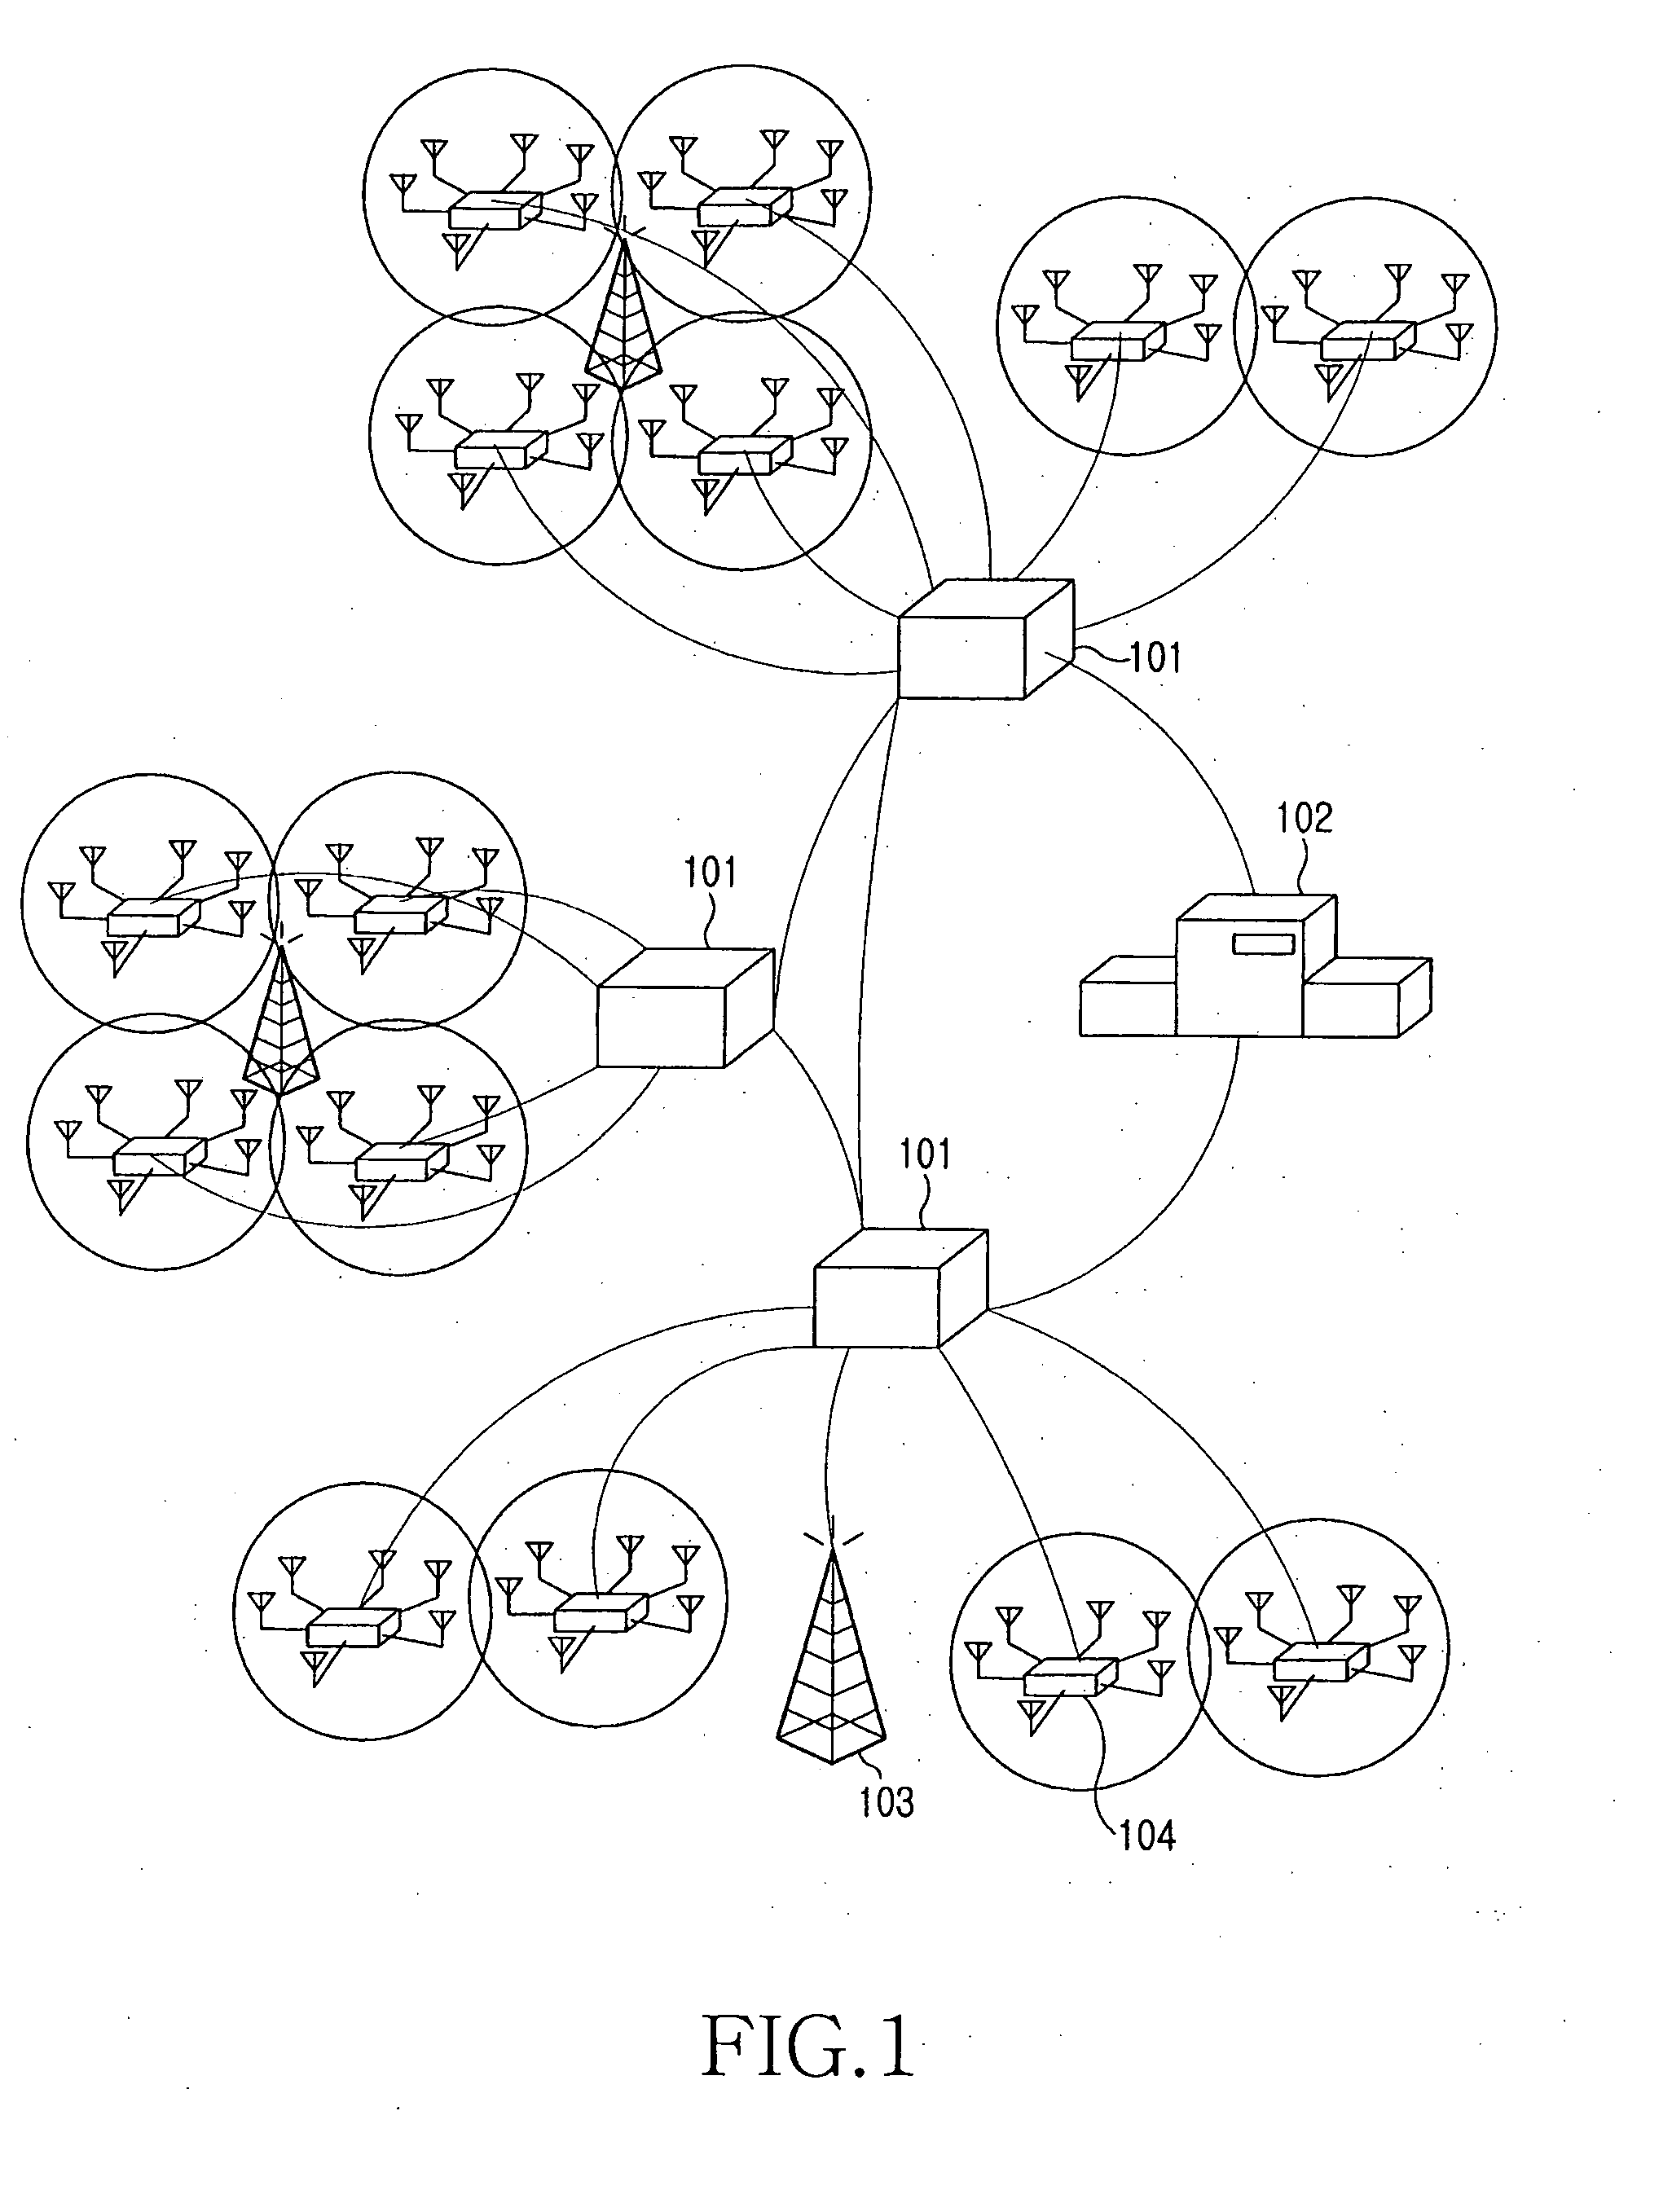 Optical distributed network system using multi input multi output